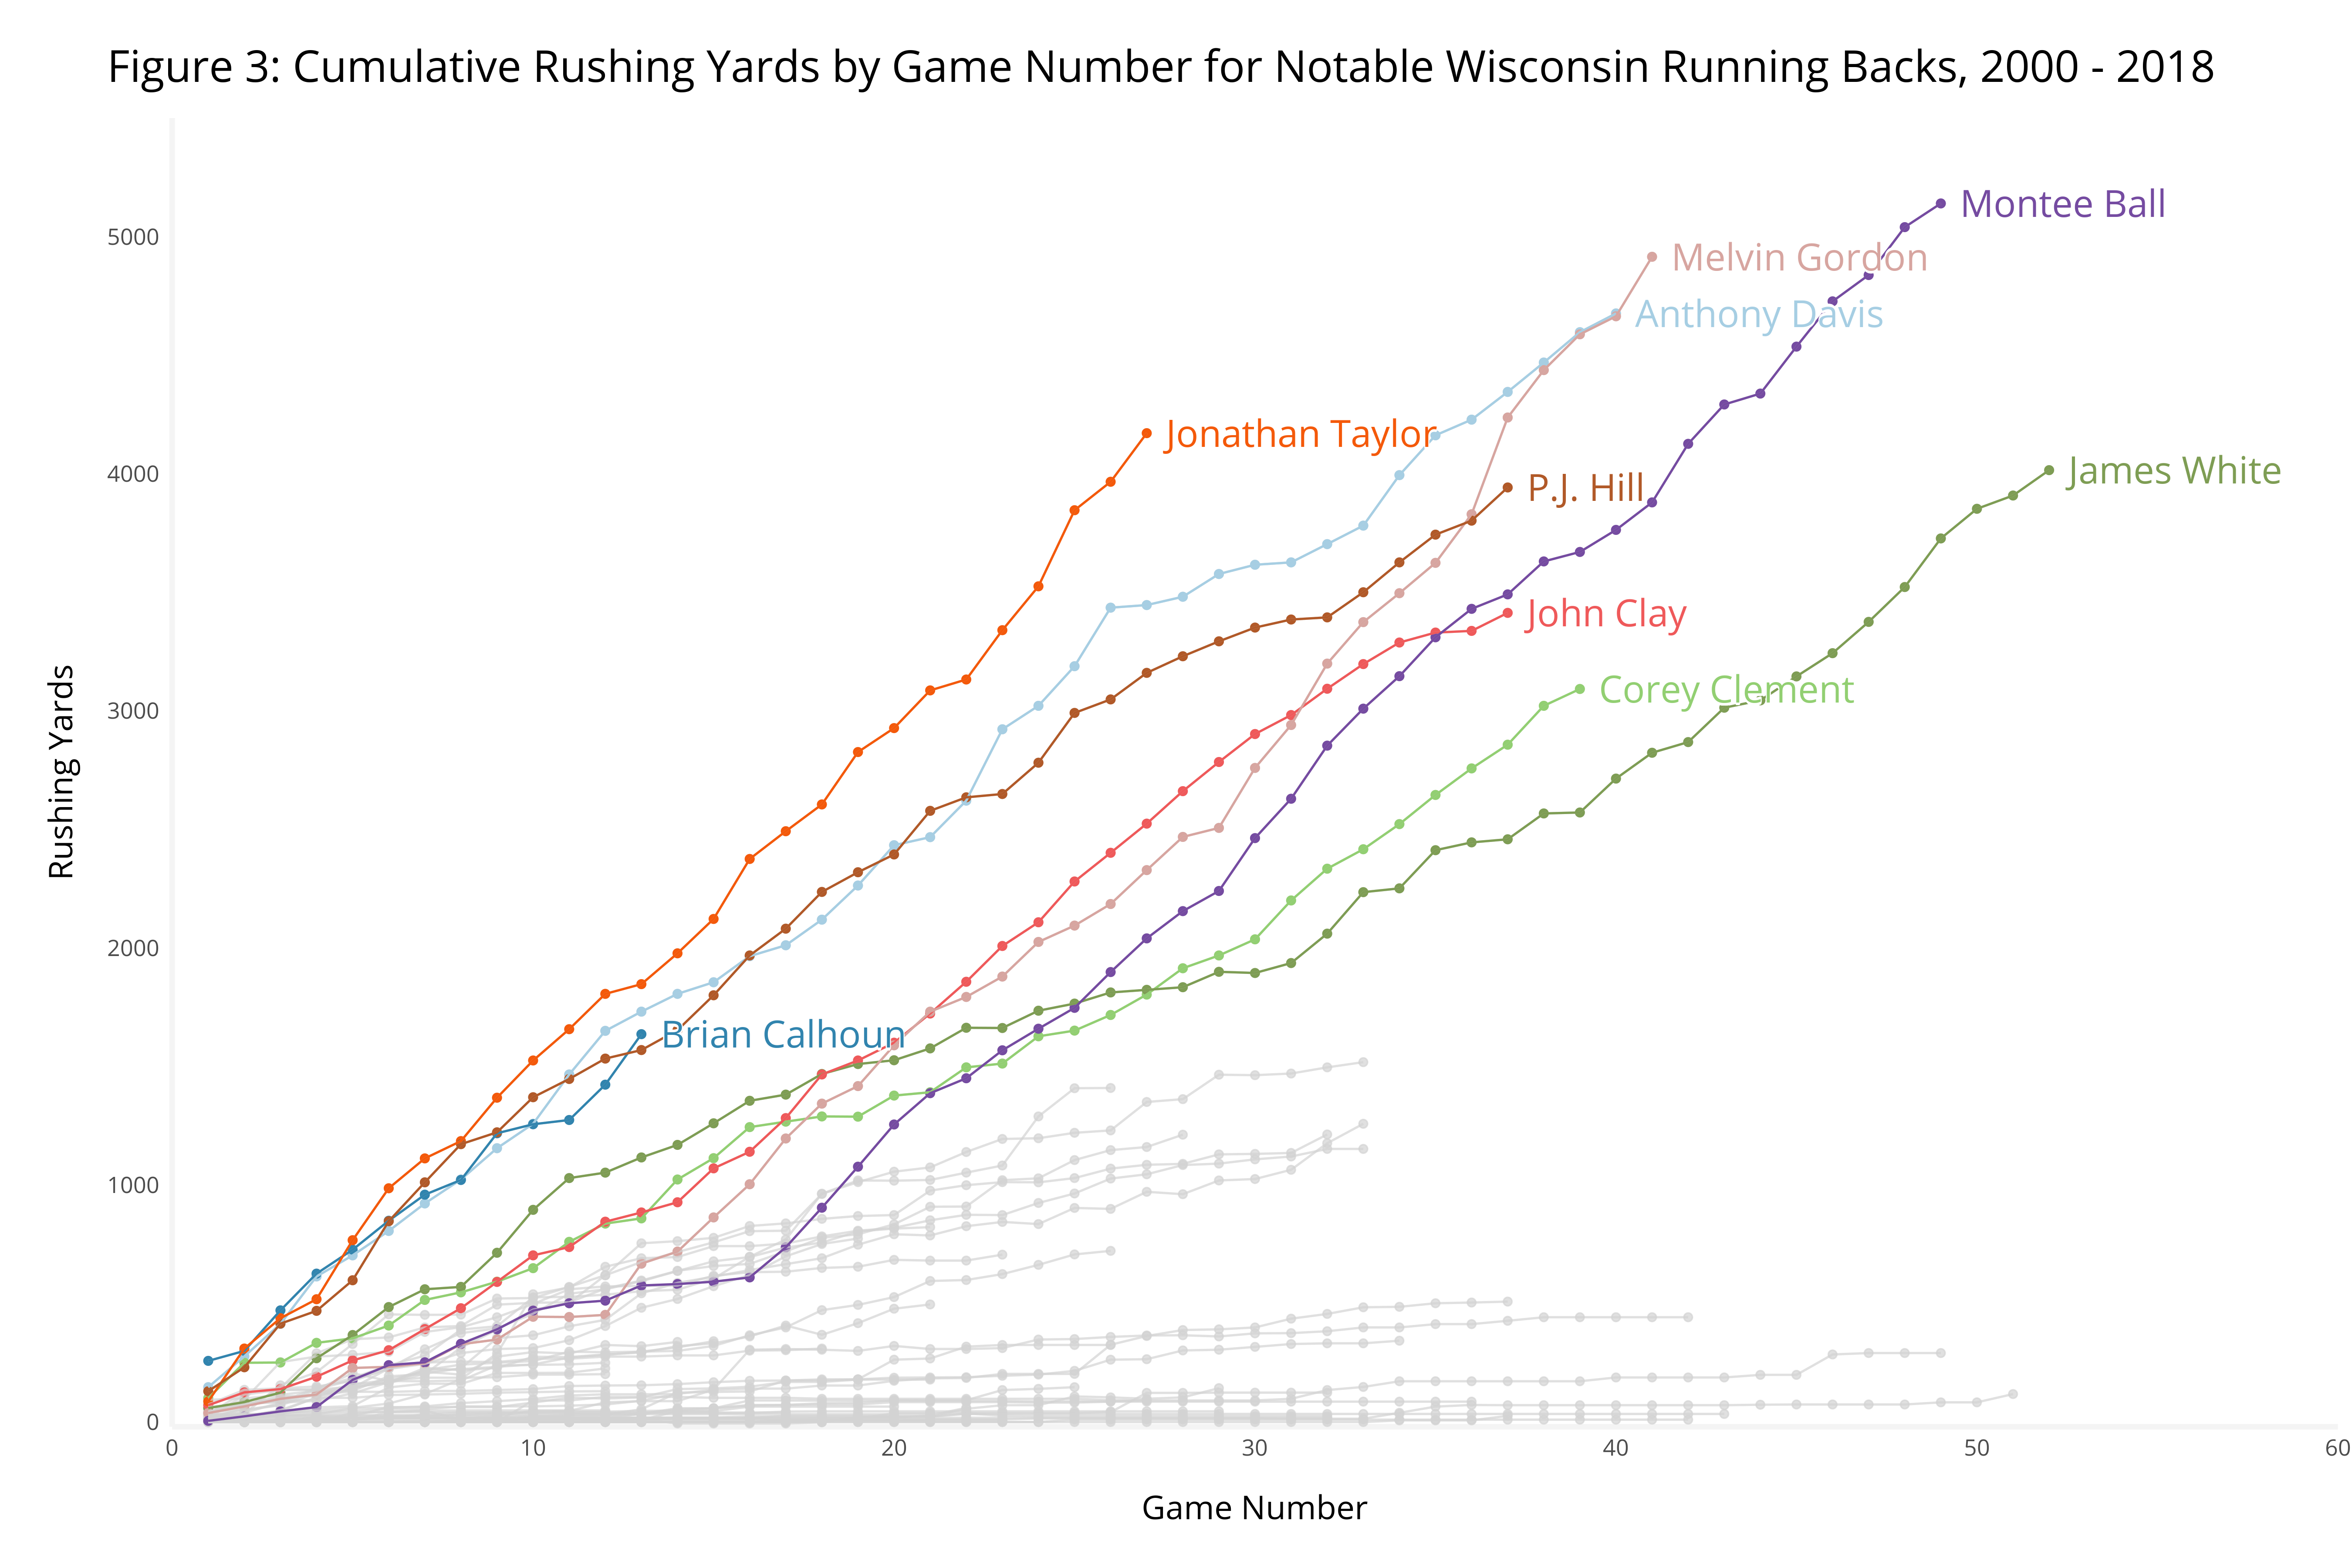 Figure 3: Cumulative Rushing Yards by Game Number for Notable Wisconsin Running Backs, 2000 - 2018